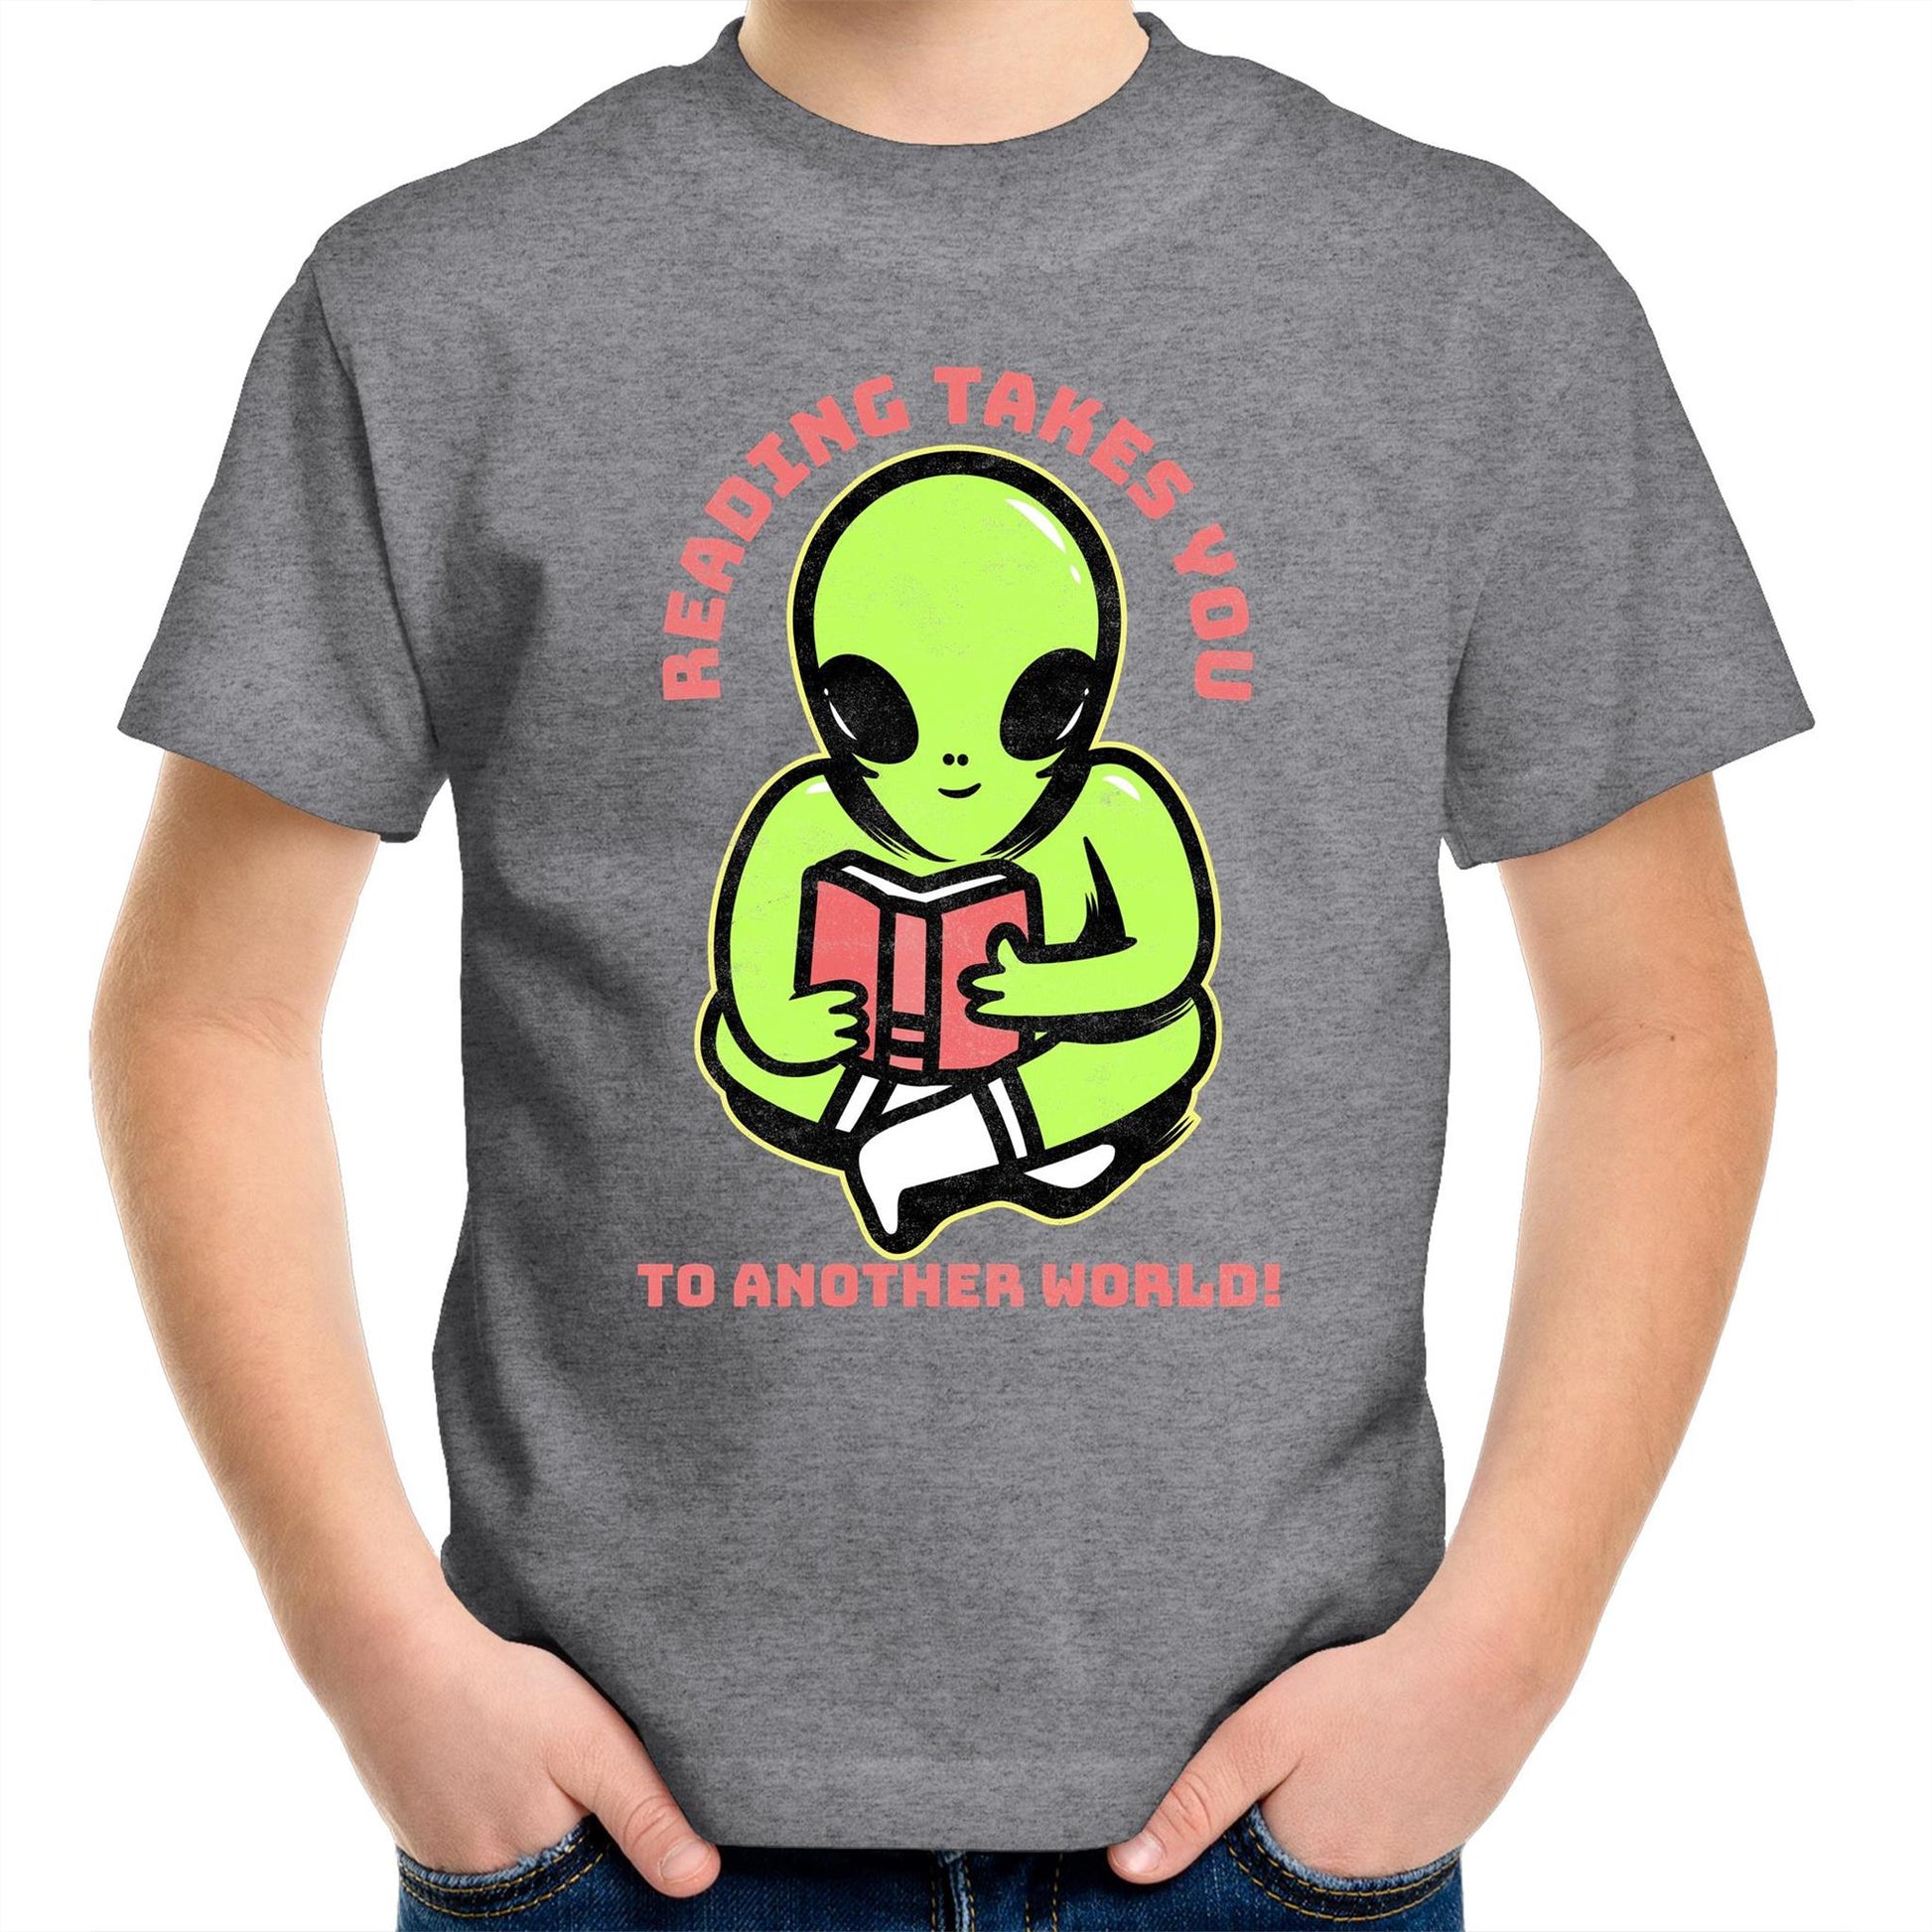 Reading Takes You To Another World, Alien - Kids Youth T-Shirt Grey Marle Kids Youth T-shirt Reading Sci Fi